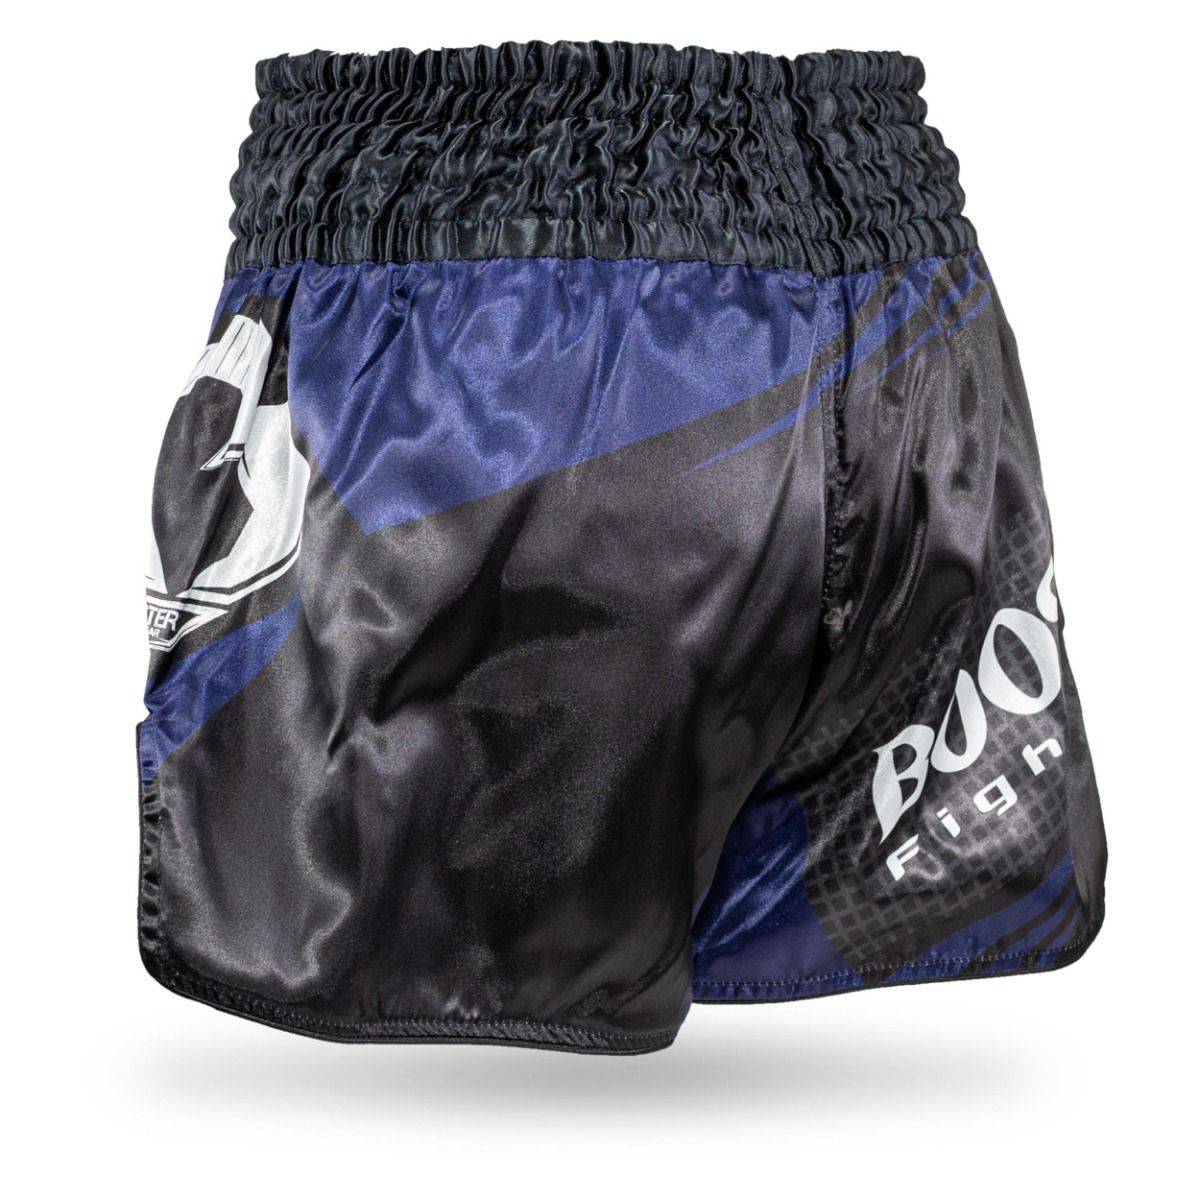 Booster broek xplosion - Booster Fight Store